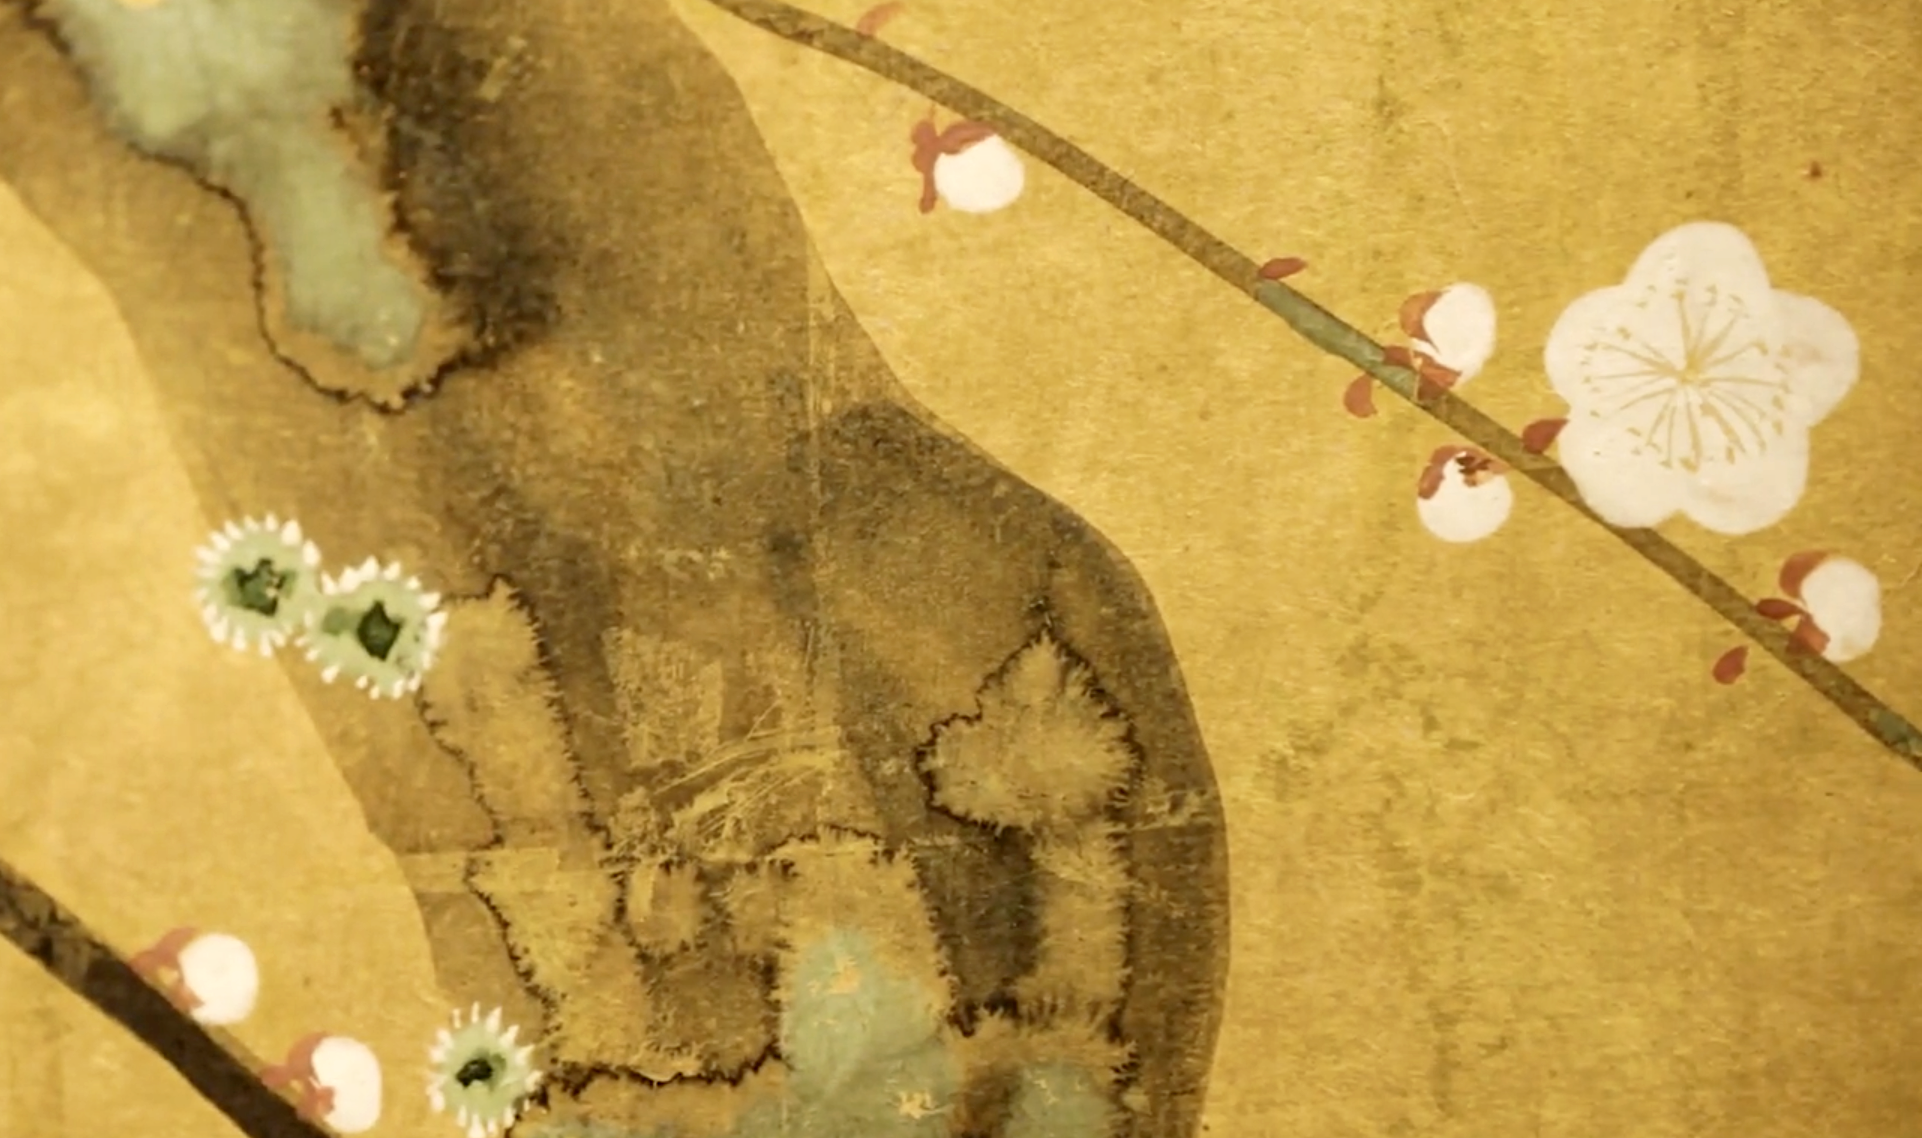 White blossoms (detail), Ogata Kōrin, Red and White Plum Blossoms, Edo period, 18th century, pair of two-fold screens, color and gold leaf on paper, 156 x 172.2 cm each, National Treasure (MOA Museum, Atami, Japan)